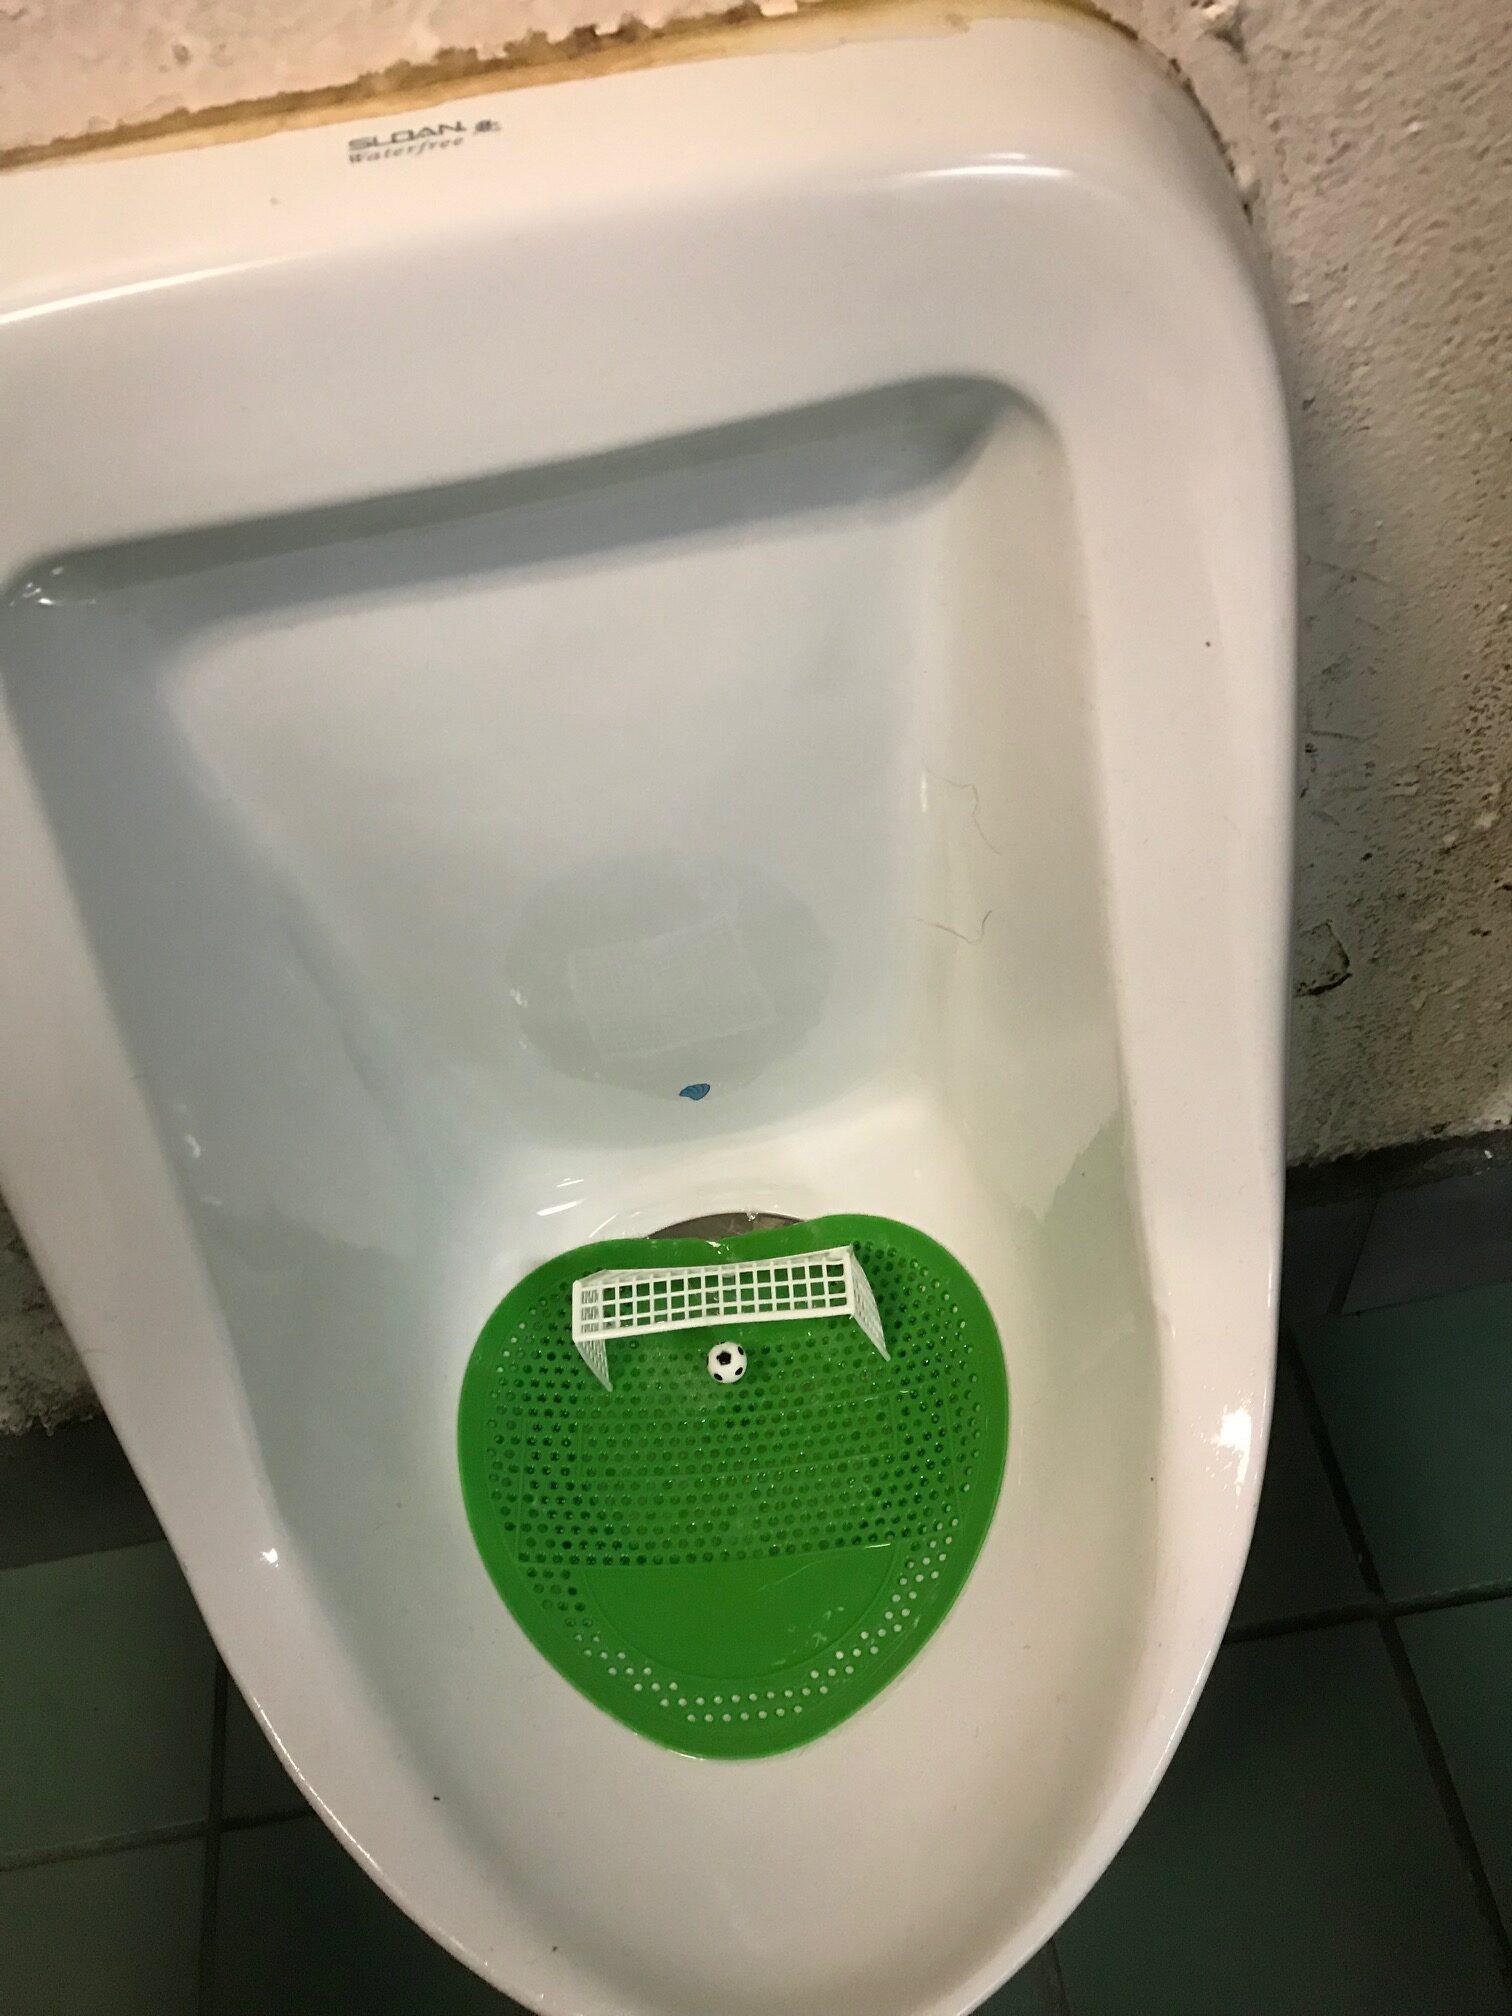 A urinal with a soccer goal and a ball hanging from a string so it moves when you... you get the idea. Now that's a memorable bathroom experience!